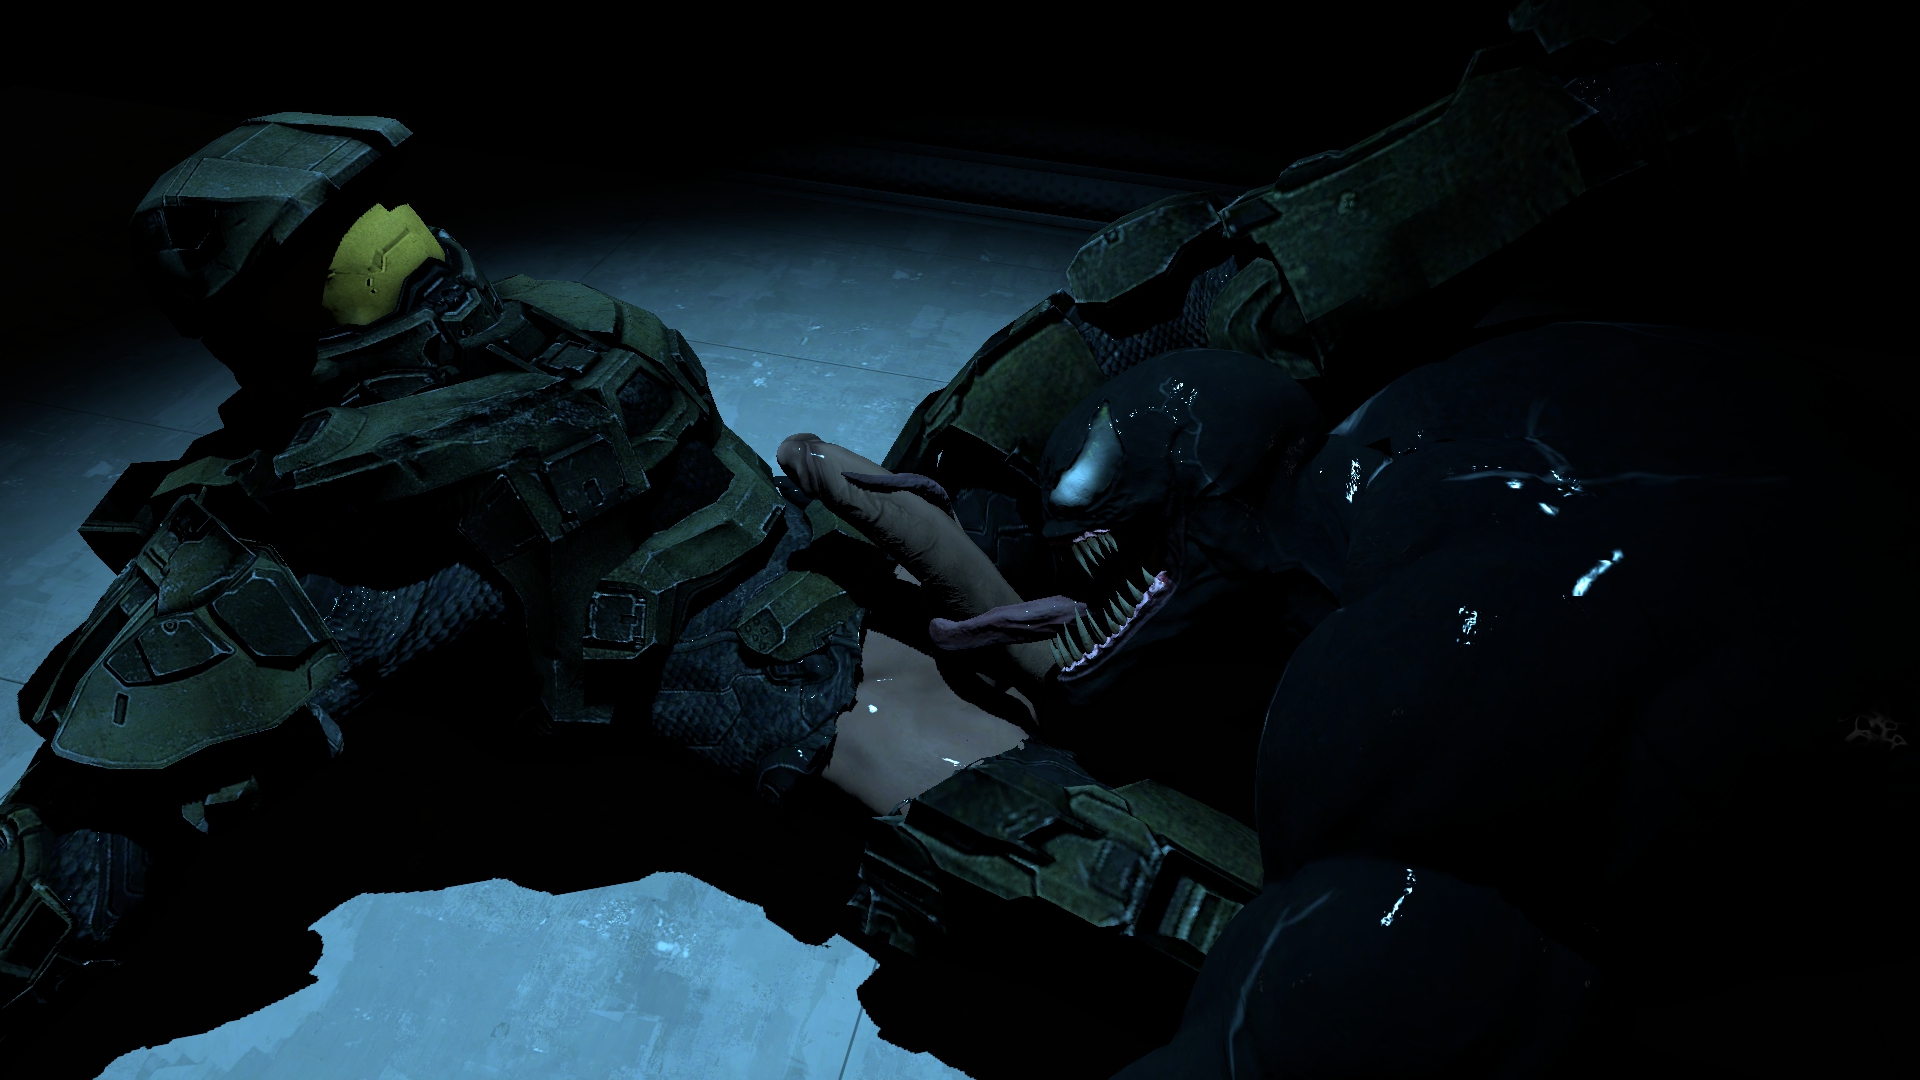 Master Chief and Venоm